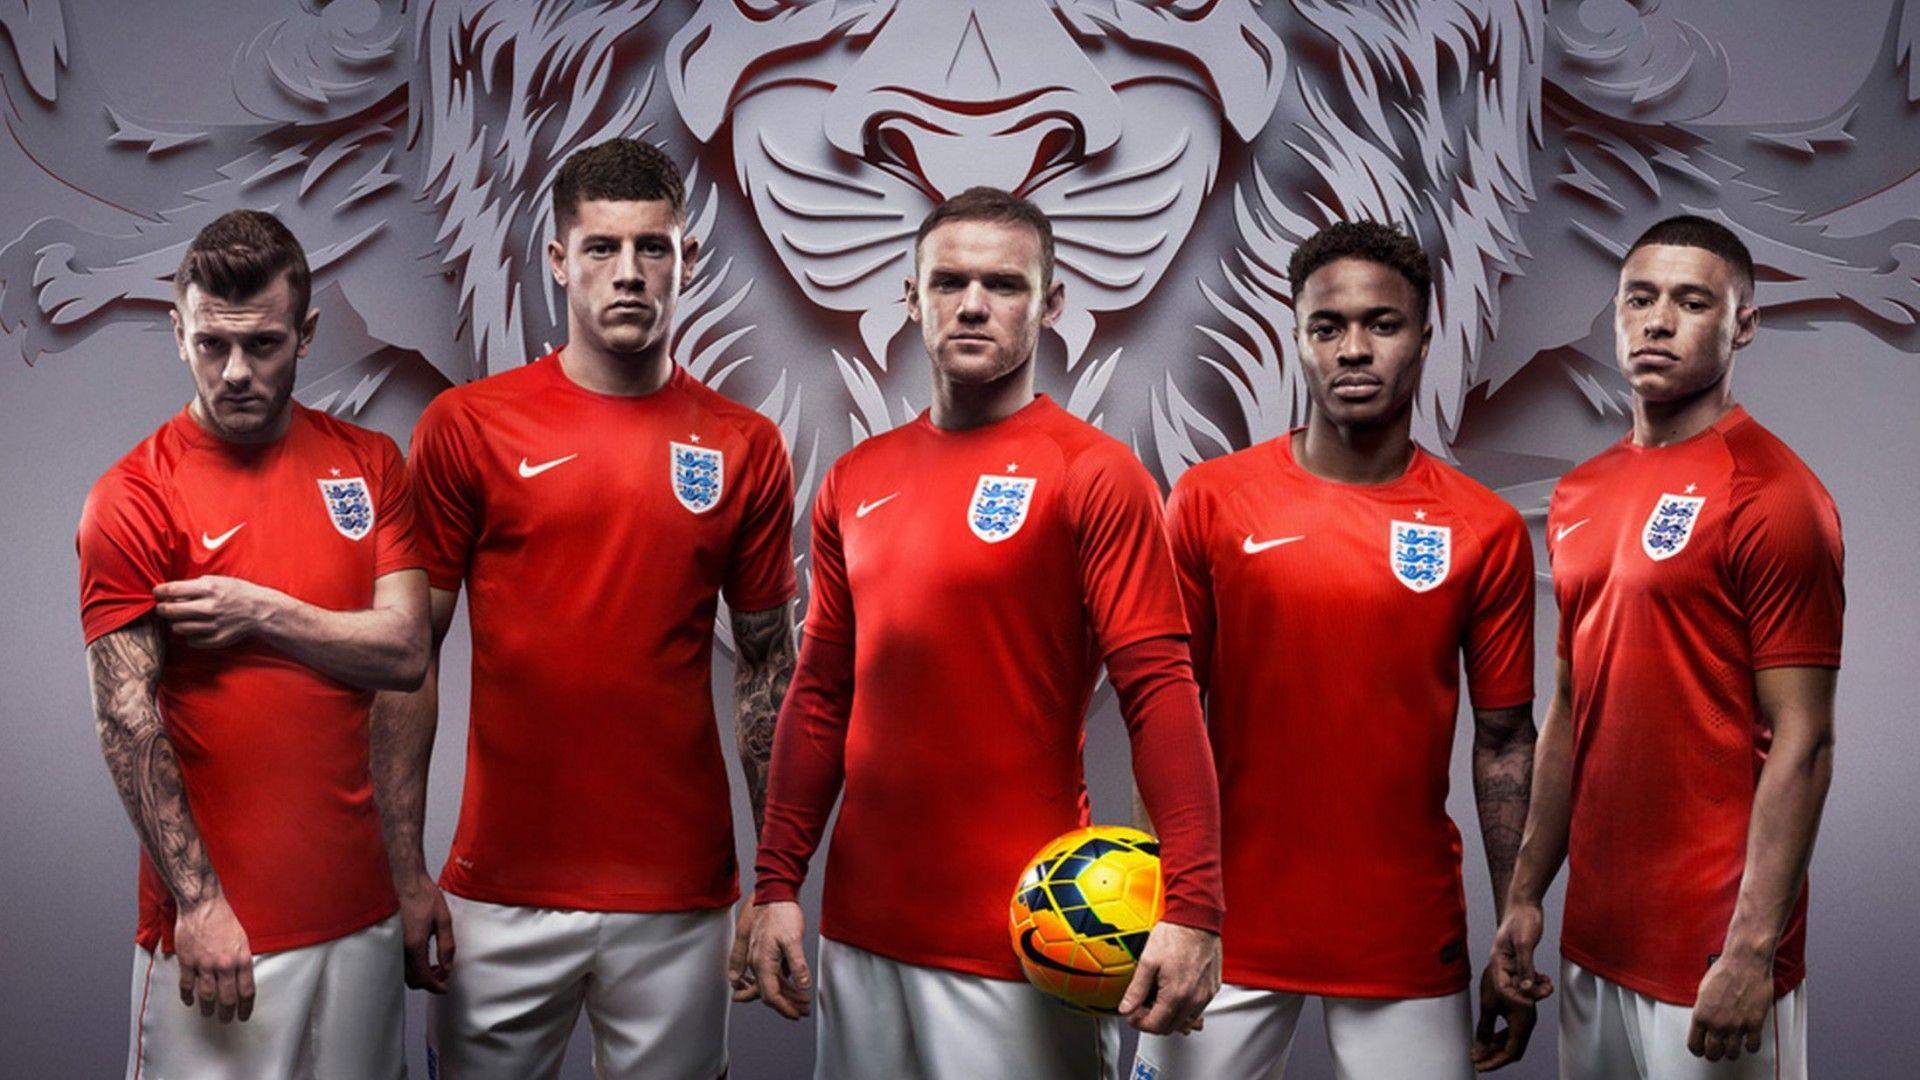 England National Team Wallpapers France 2016